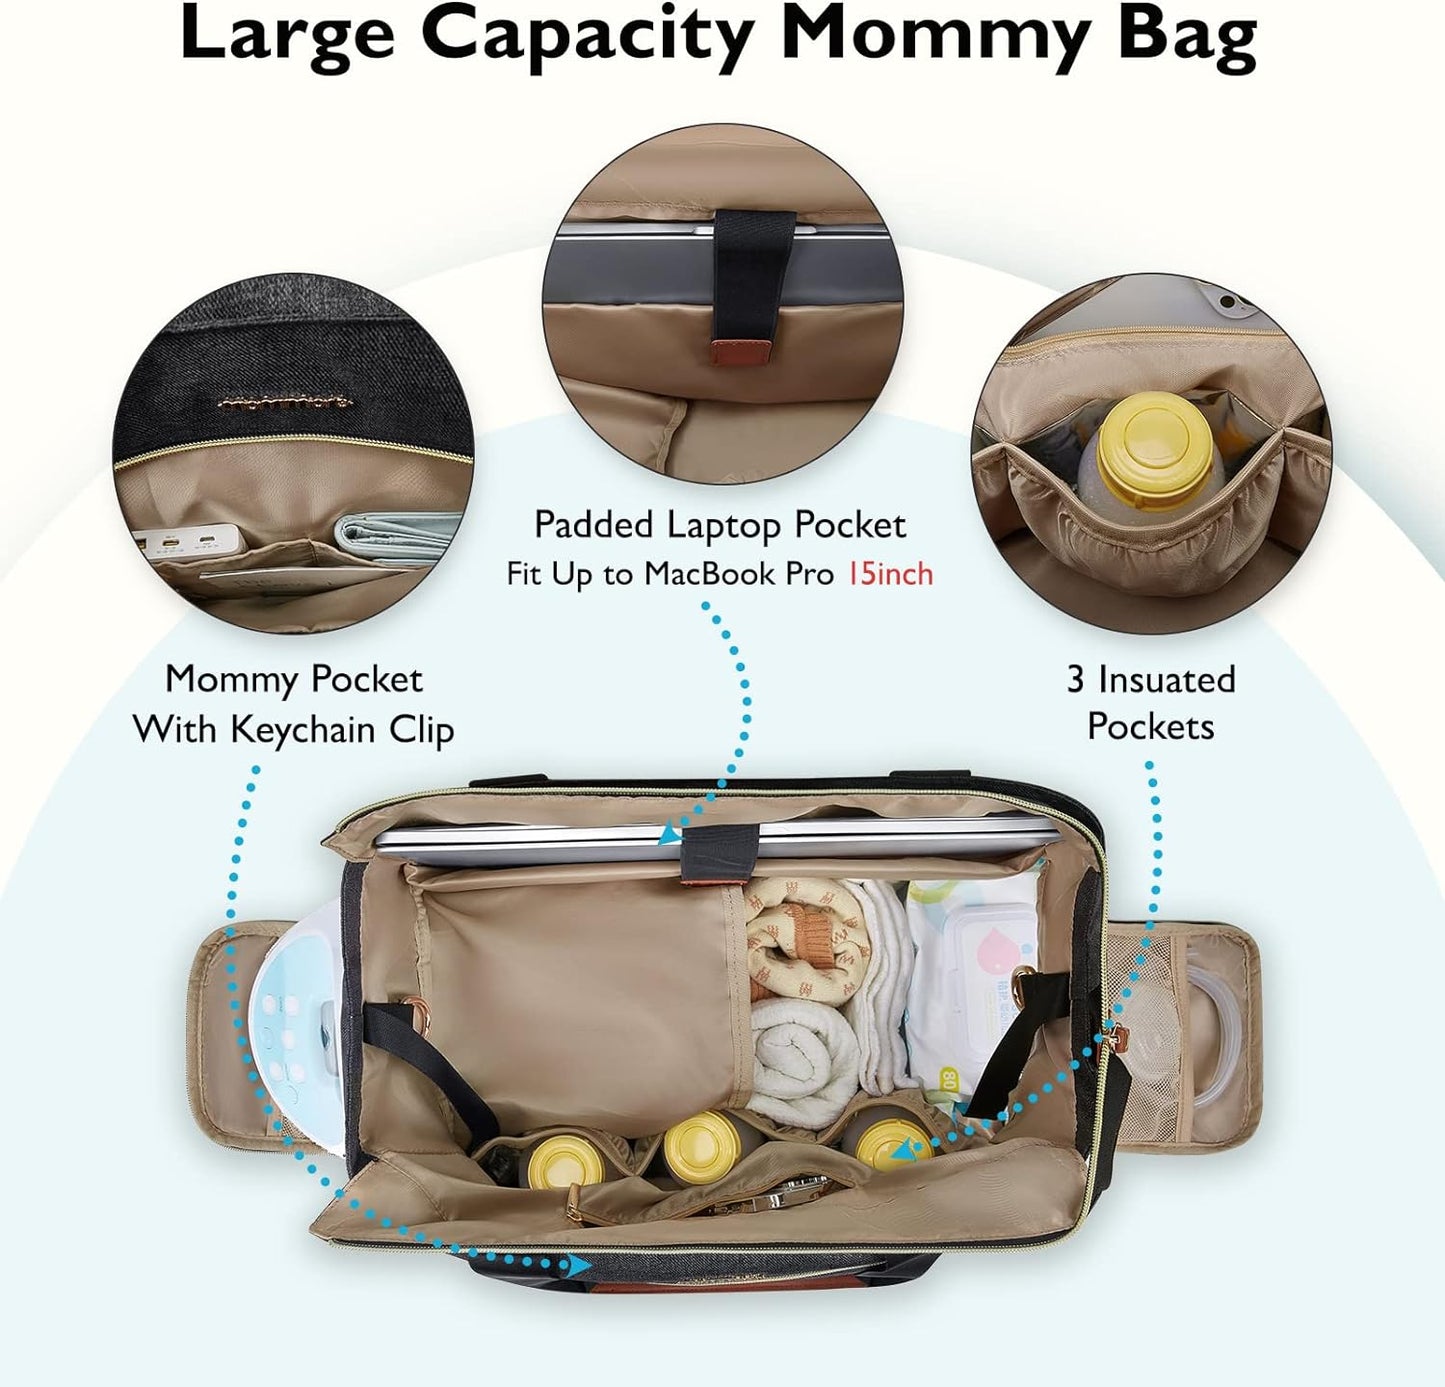 mommore Breast Pump Bag Diaper Tote Bag with 15 Inch Laptop Sleeve Fit Most Breast Pumps Like Medela, Spectra S1,S2, Evenflo